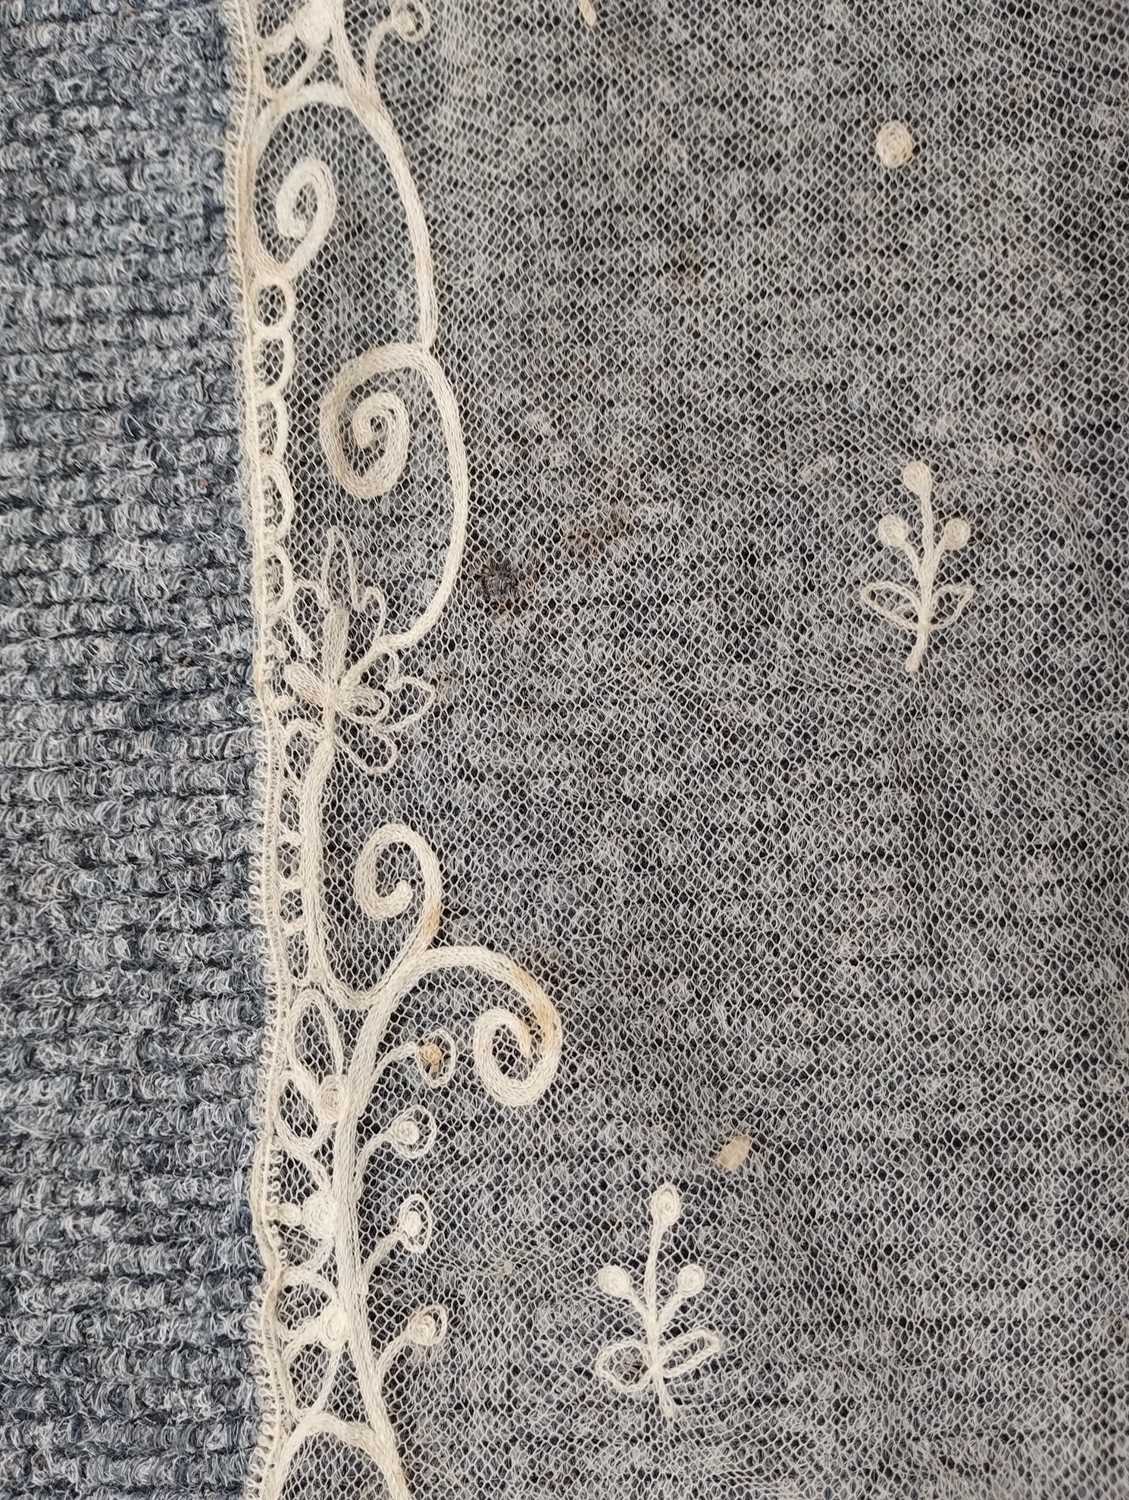 Early 20th Century Lace comprising a flounce with appliquéd flower heads and motifs within a - Image 21 of 32